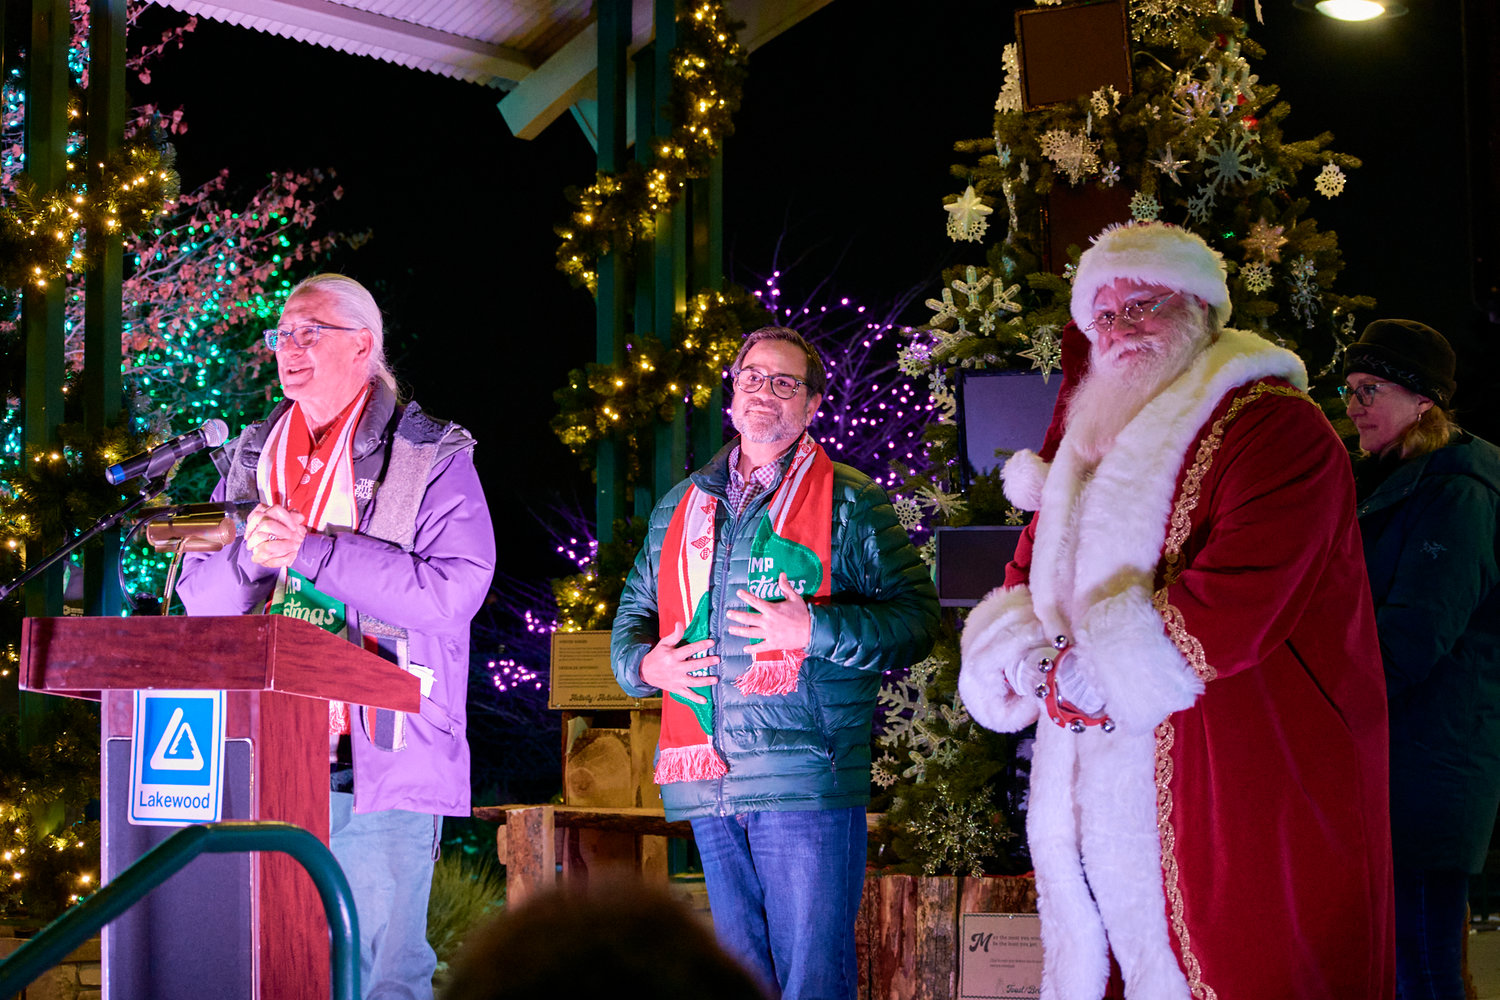 Lakewood Mayor Adam Paul at the annual mayoral tree lighting ceremony with Camp Christmas creator Lonnie Hanzon and Santa Claus.